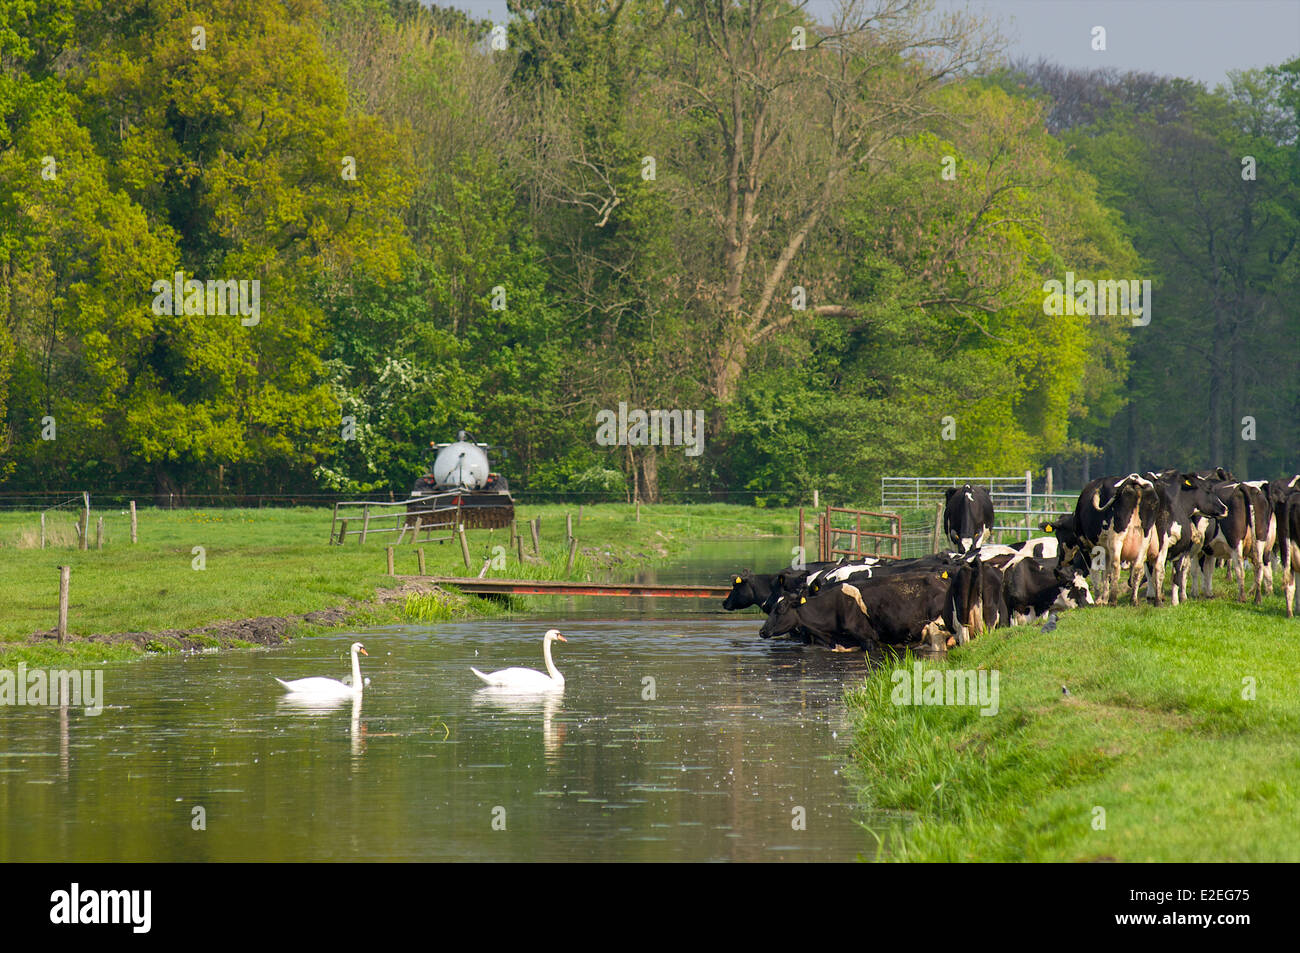 Swans and cows in a ditch cooling down during a warm summer day with a farmer working on the field Stock Photo